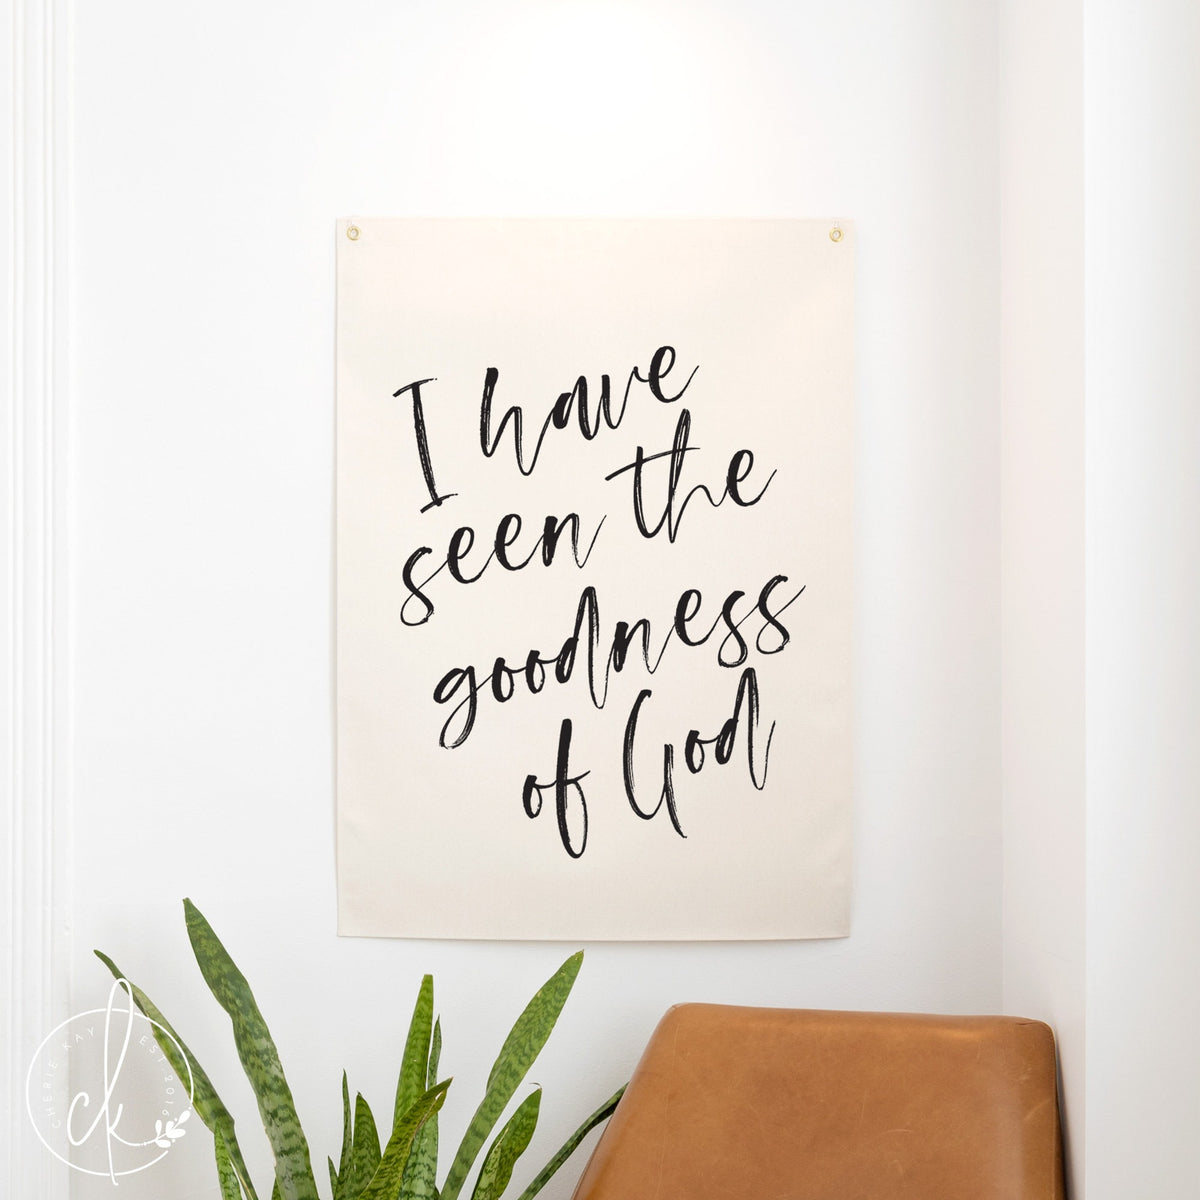 I Have Seen The Goodness Of God | Fabric Wall Hanging | Christian Home Decor | Scripture Art | Living Room Decor